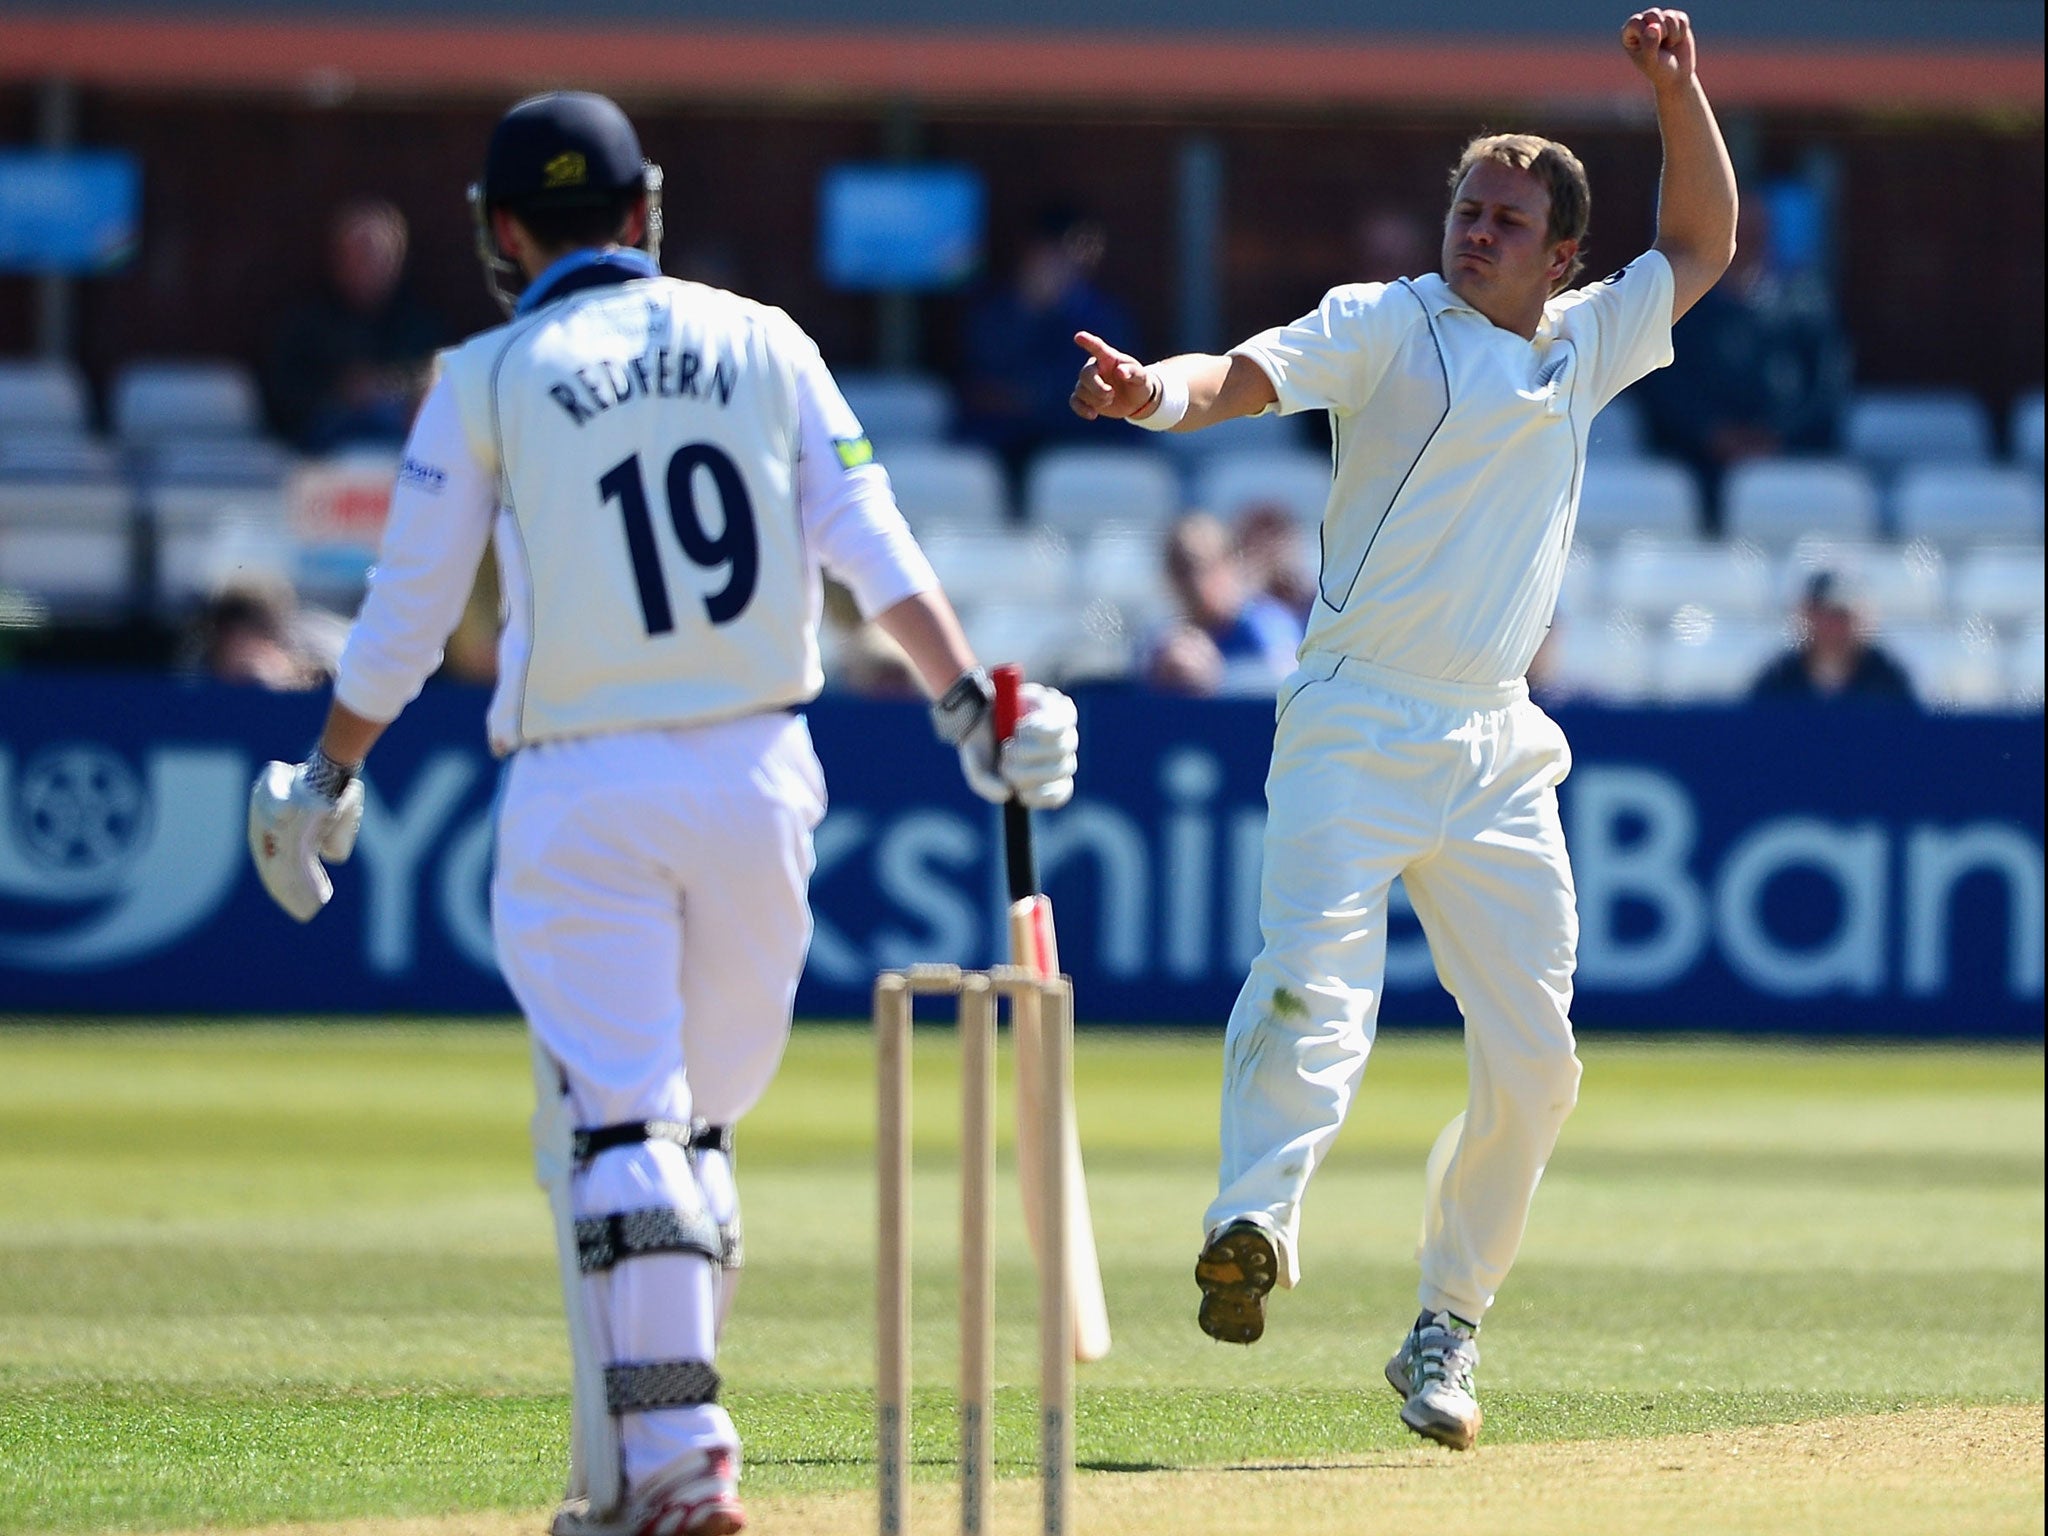 Neil Wagner, of New Zealand, celebrates the wicket of Derbyshire’s Dan Redfern at the County Ground yesterday